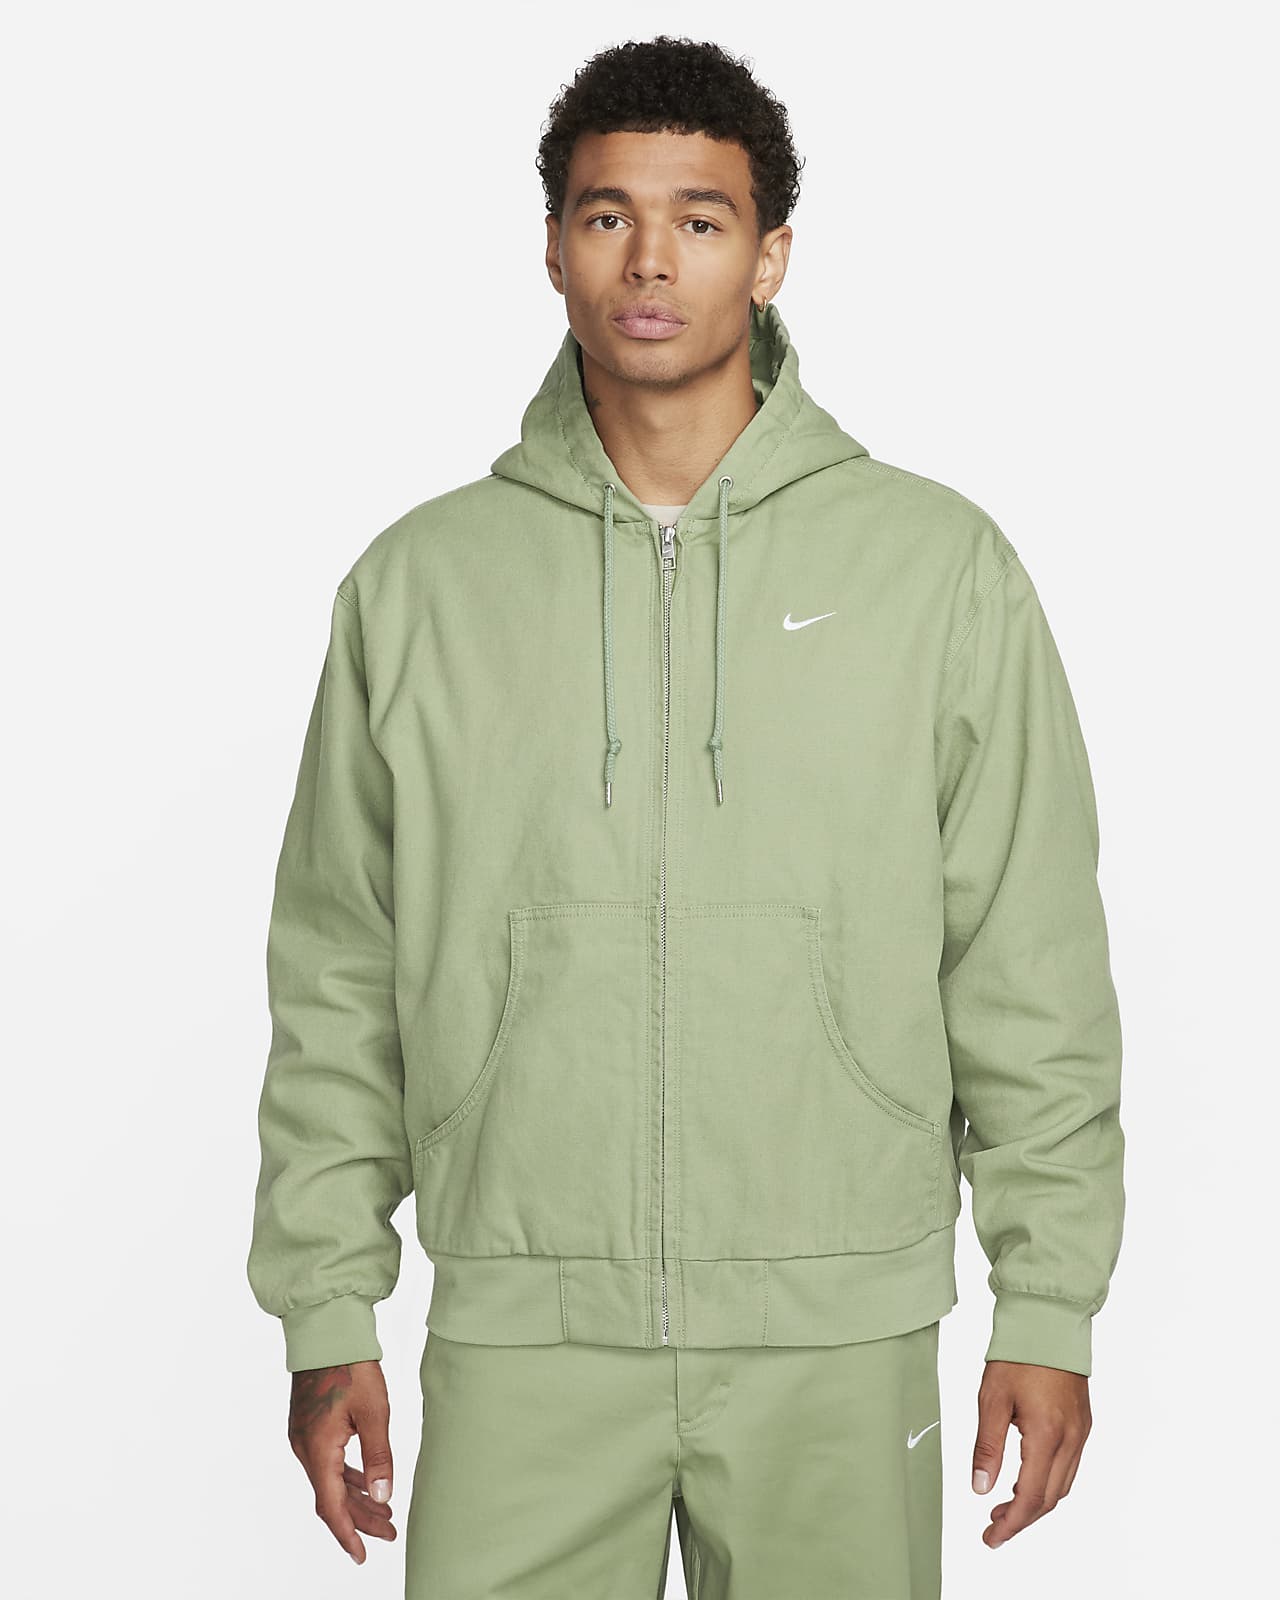 https://static.nike.com/a/images/t_PDP_1280_v1/f_auto,q_auto:eco/dca72413-9443-44b5-941e-d0ceda1af7bf/life-padded-hooded-jacket-tGtbCt.png